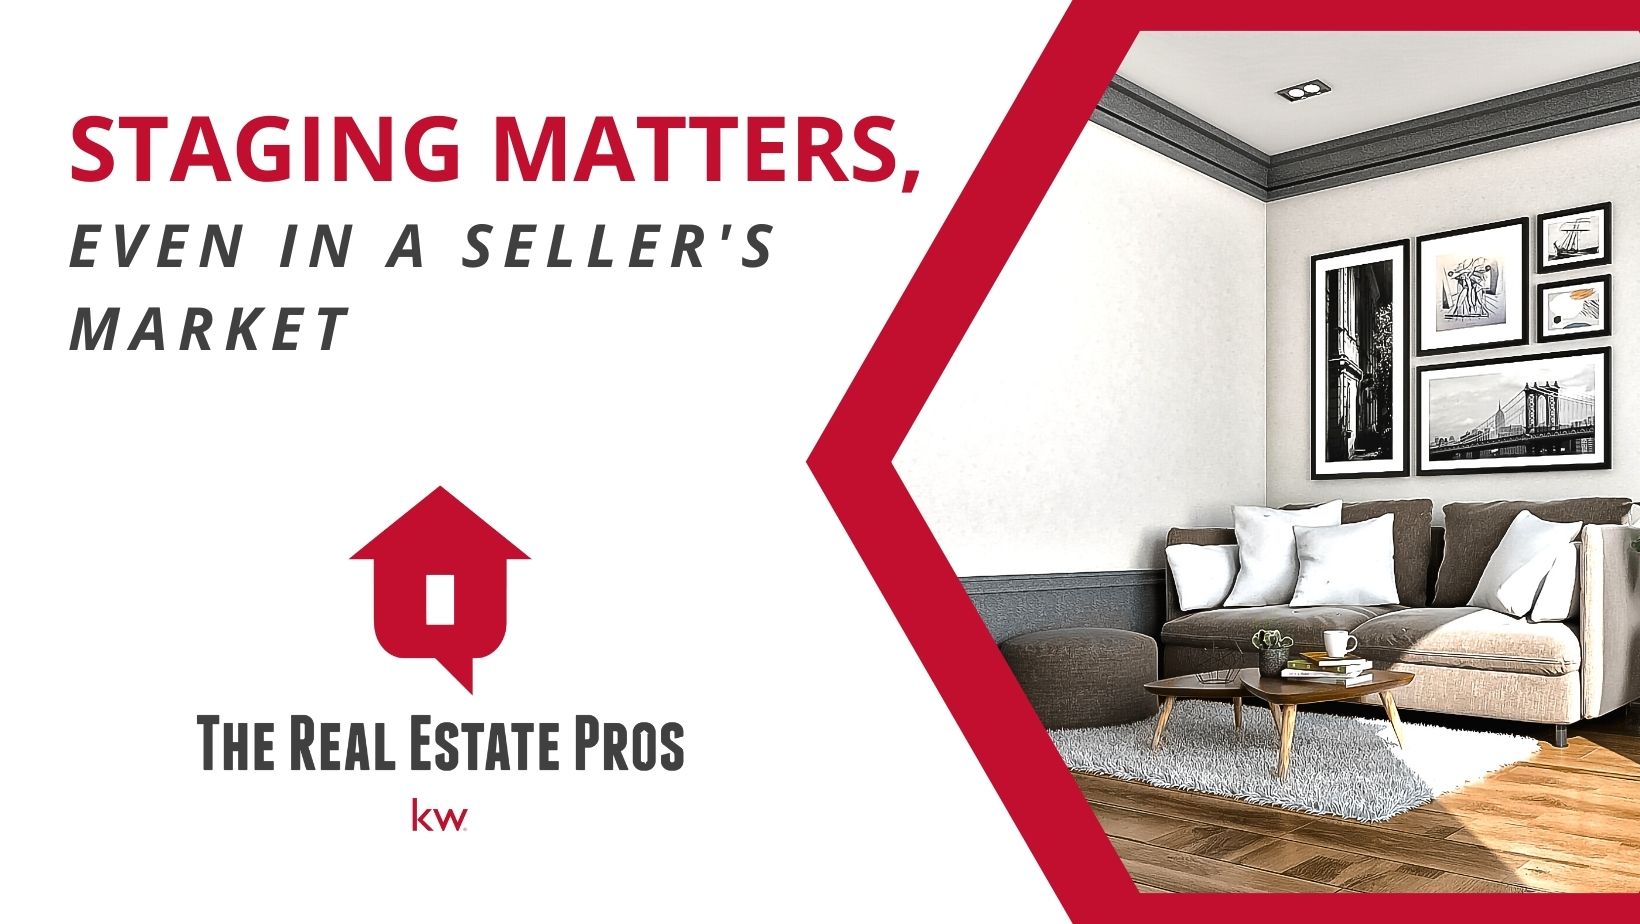 Staging Matters, Even in a Seller’s Market